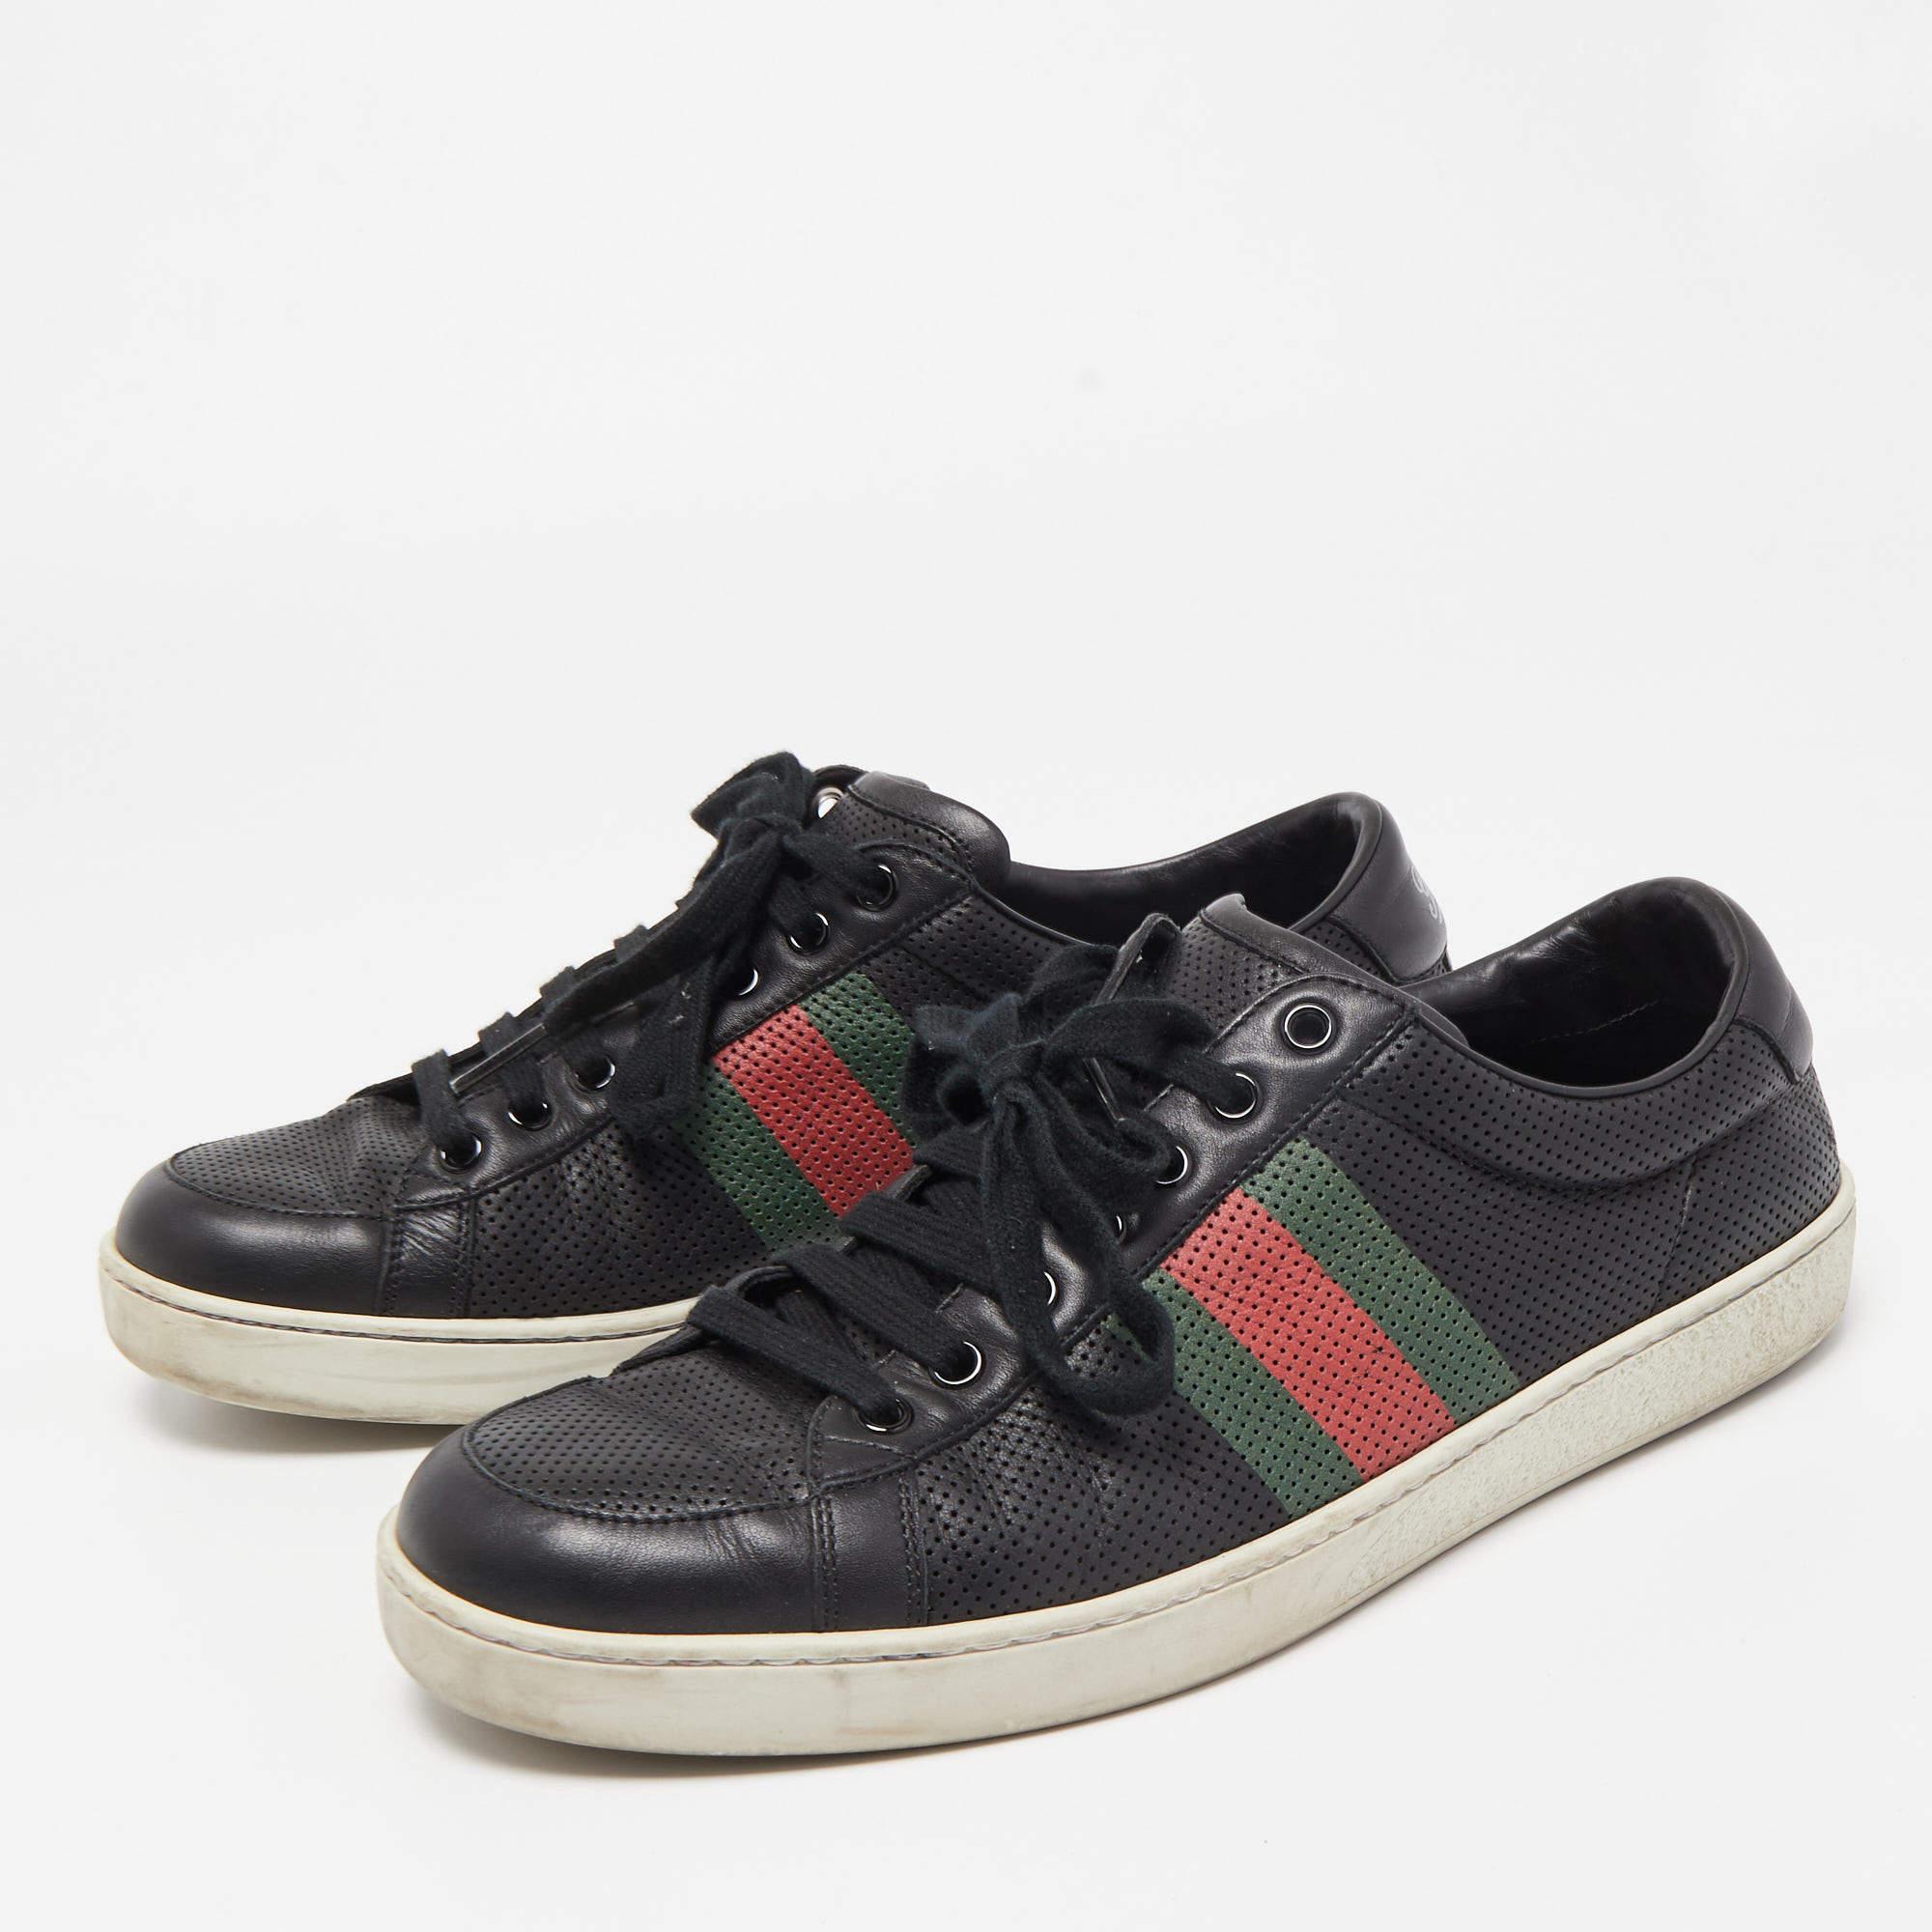 Gucci Black Perforated Leather Web Detail Low Top Sneakers Size 42.5 For Sale 4